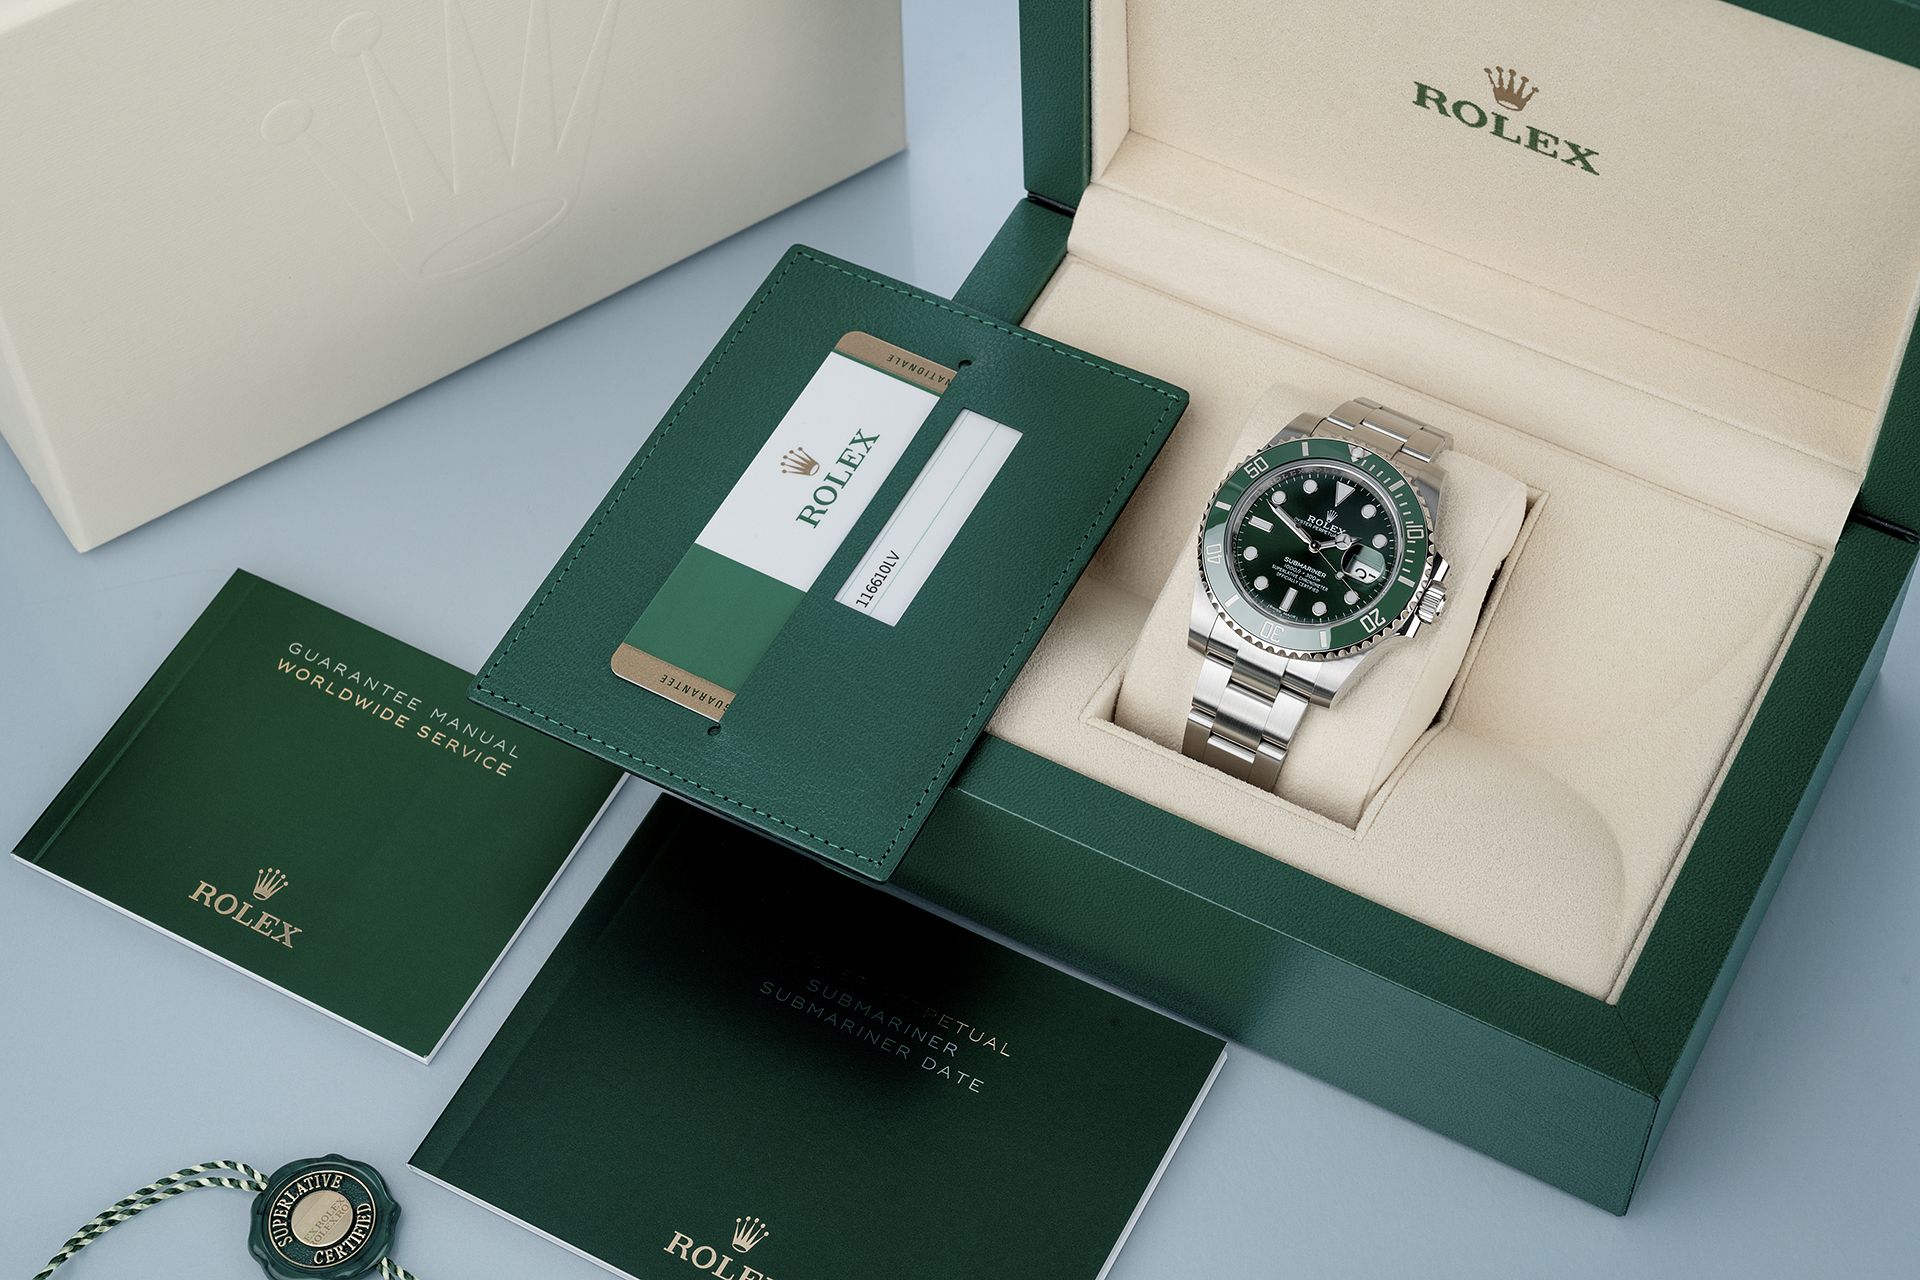 2020 LAST EDITION ROLEX "HULK" REF 116610LV SUBMARINER - BOX/ CARD/ BOOKLETS/ TAG/ VALUATION ETC - Image 2 of 10